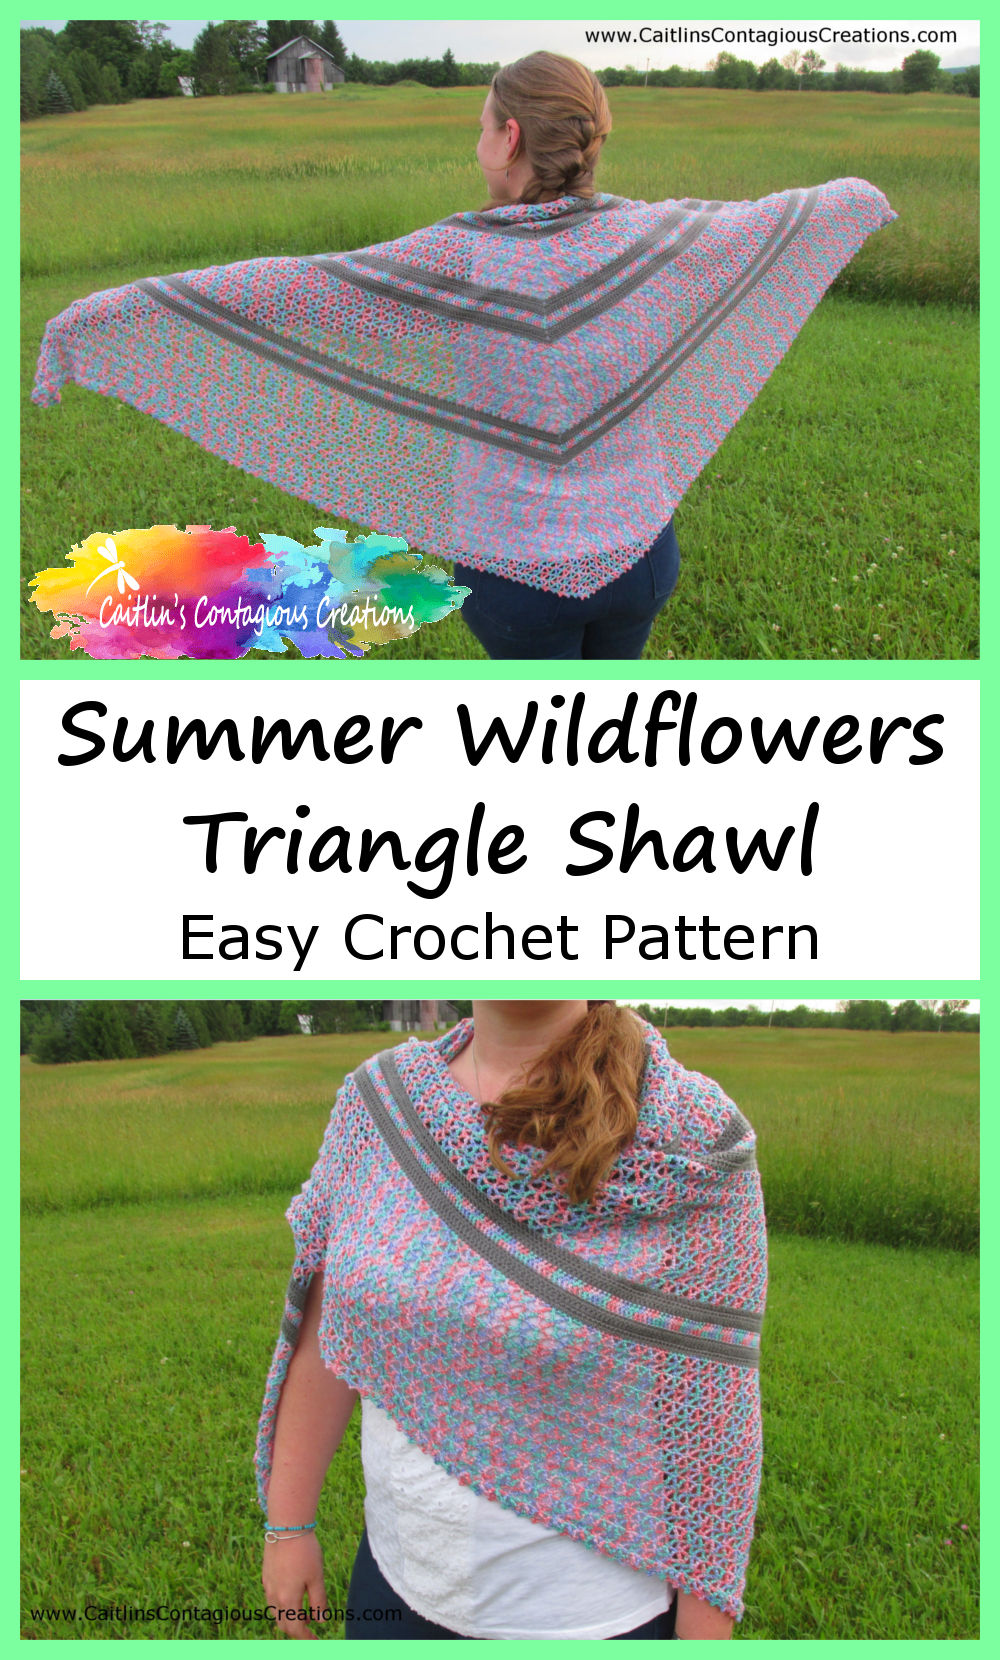 two modeled photos of finished lace weight shawl with text overlay Summer Wilkdflowers Triangle Shawl and company logo